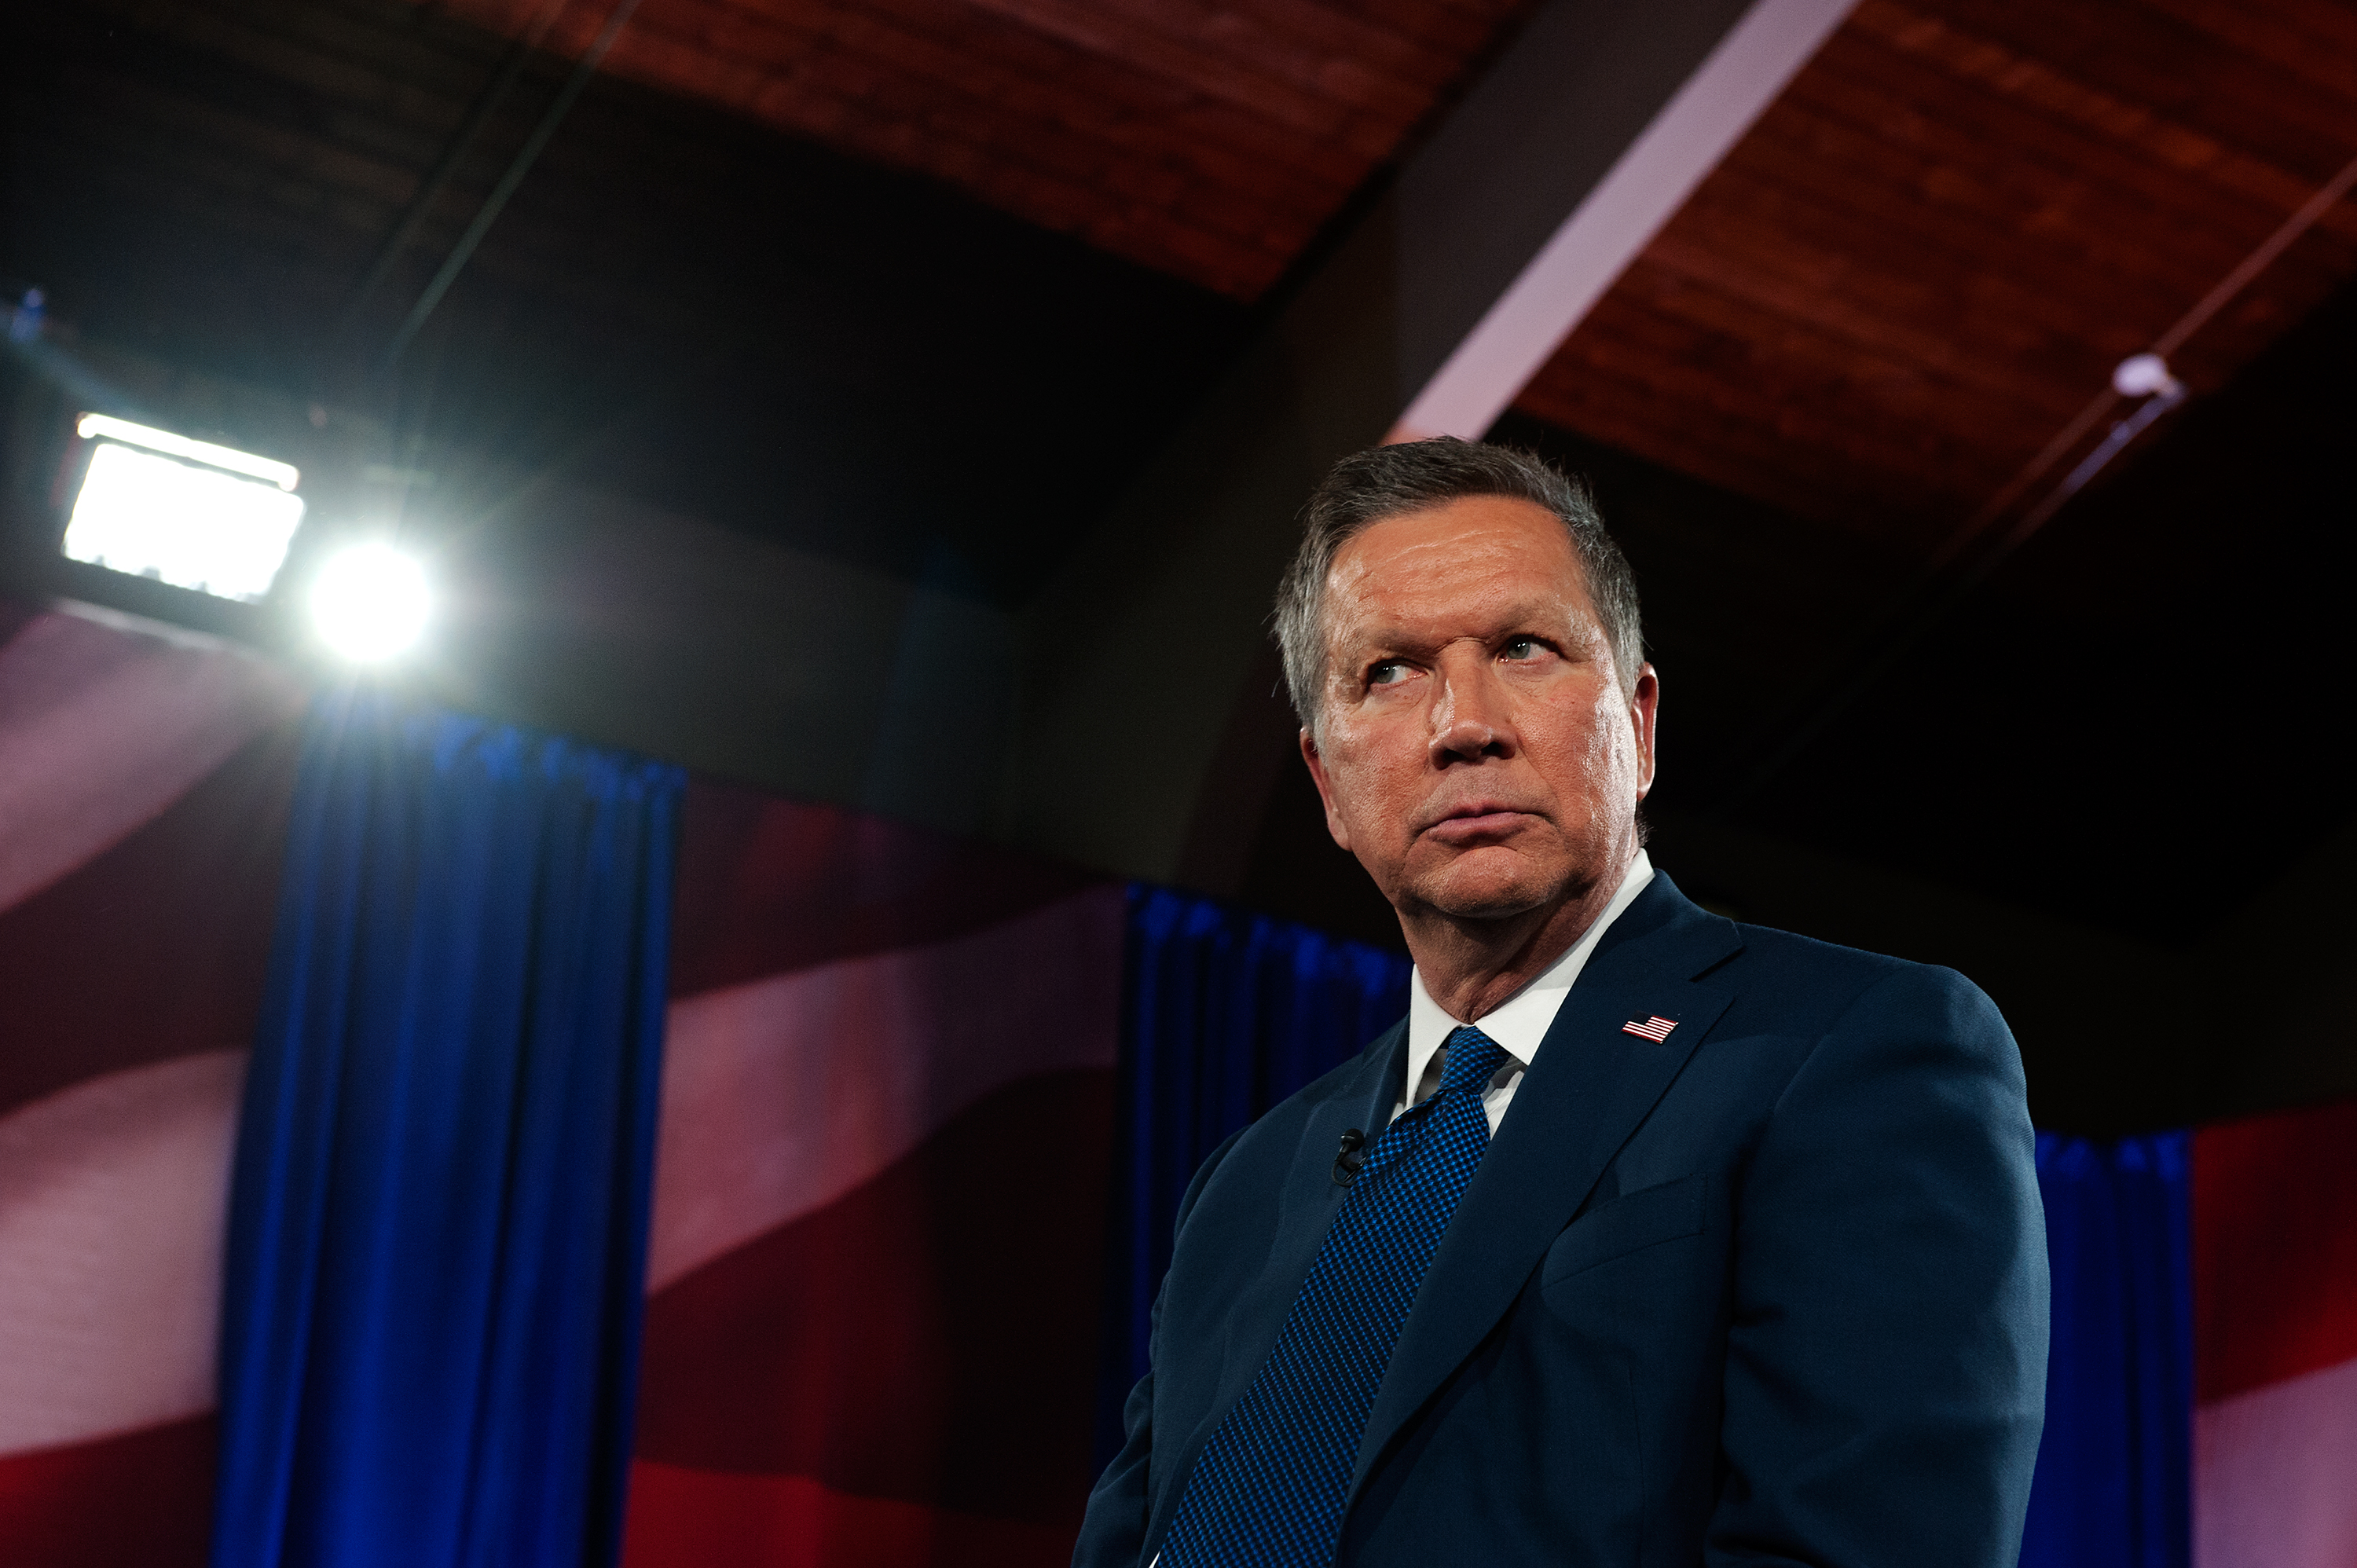 John Kasich speaks with the audience during a town hall meeting at St. Helen's Roman Catholic Church on March 30, 2016 in New York City. (Bryan Thomas—;Getty Images)